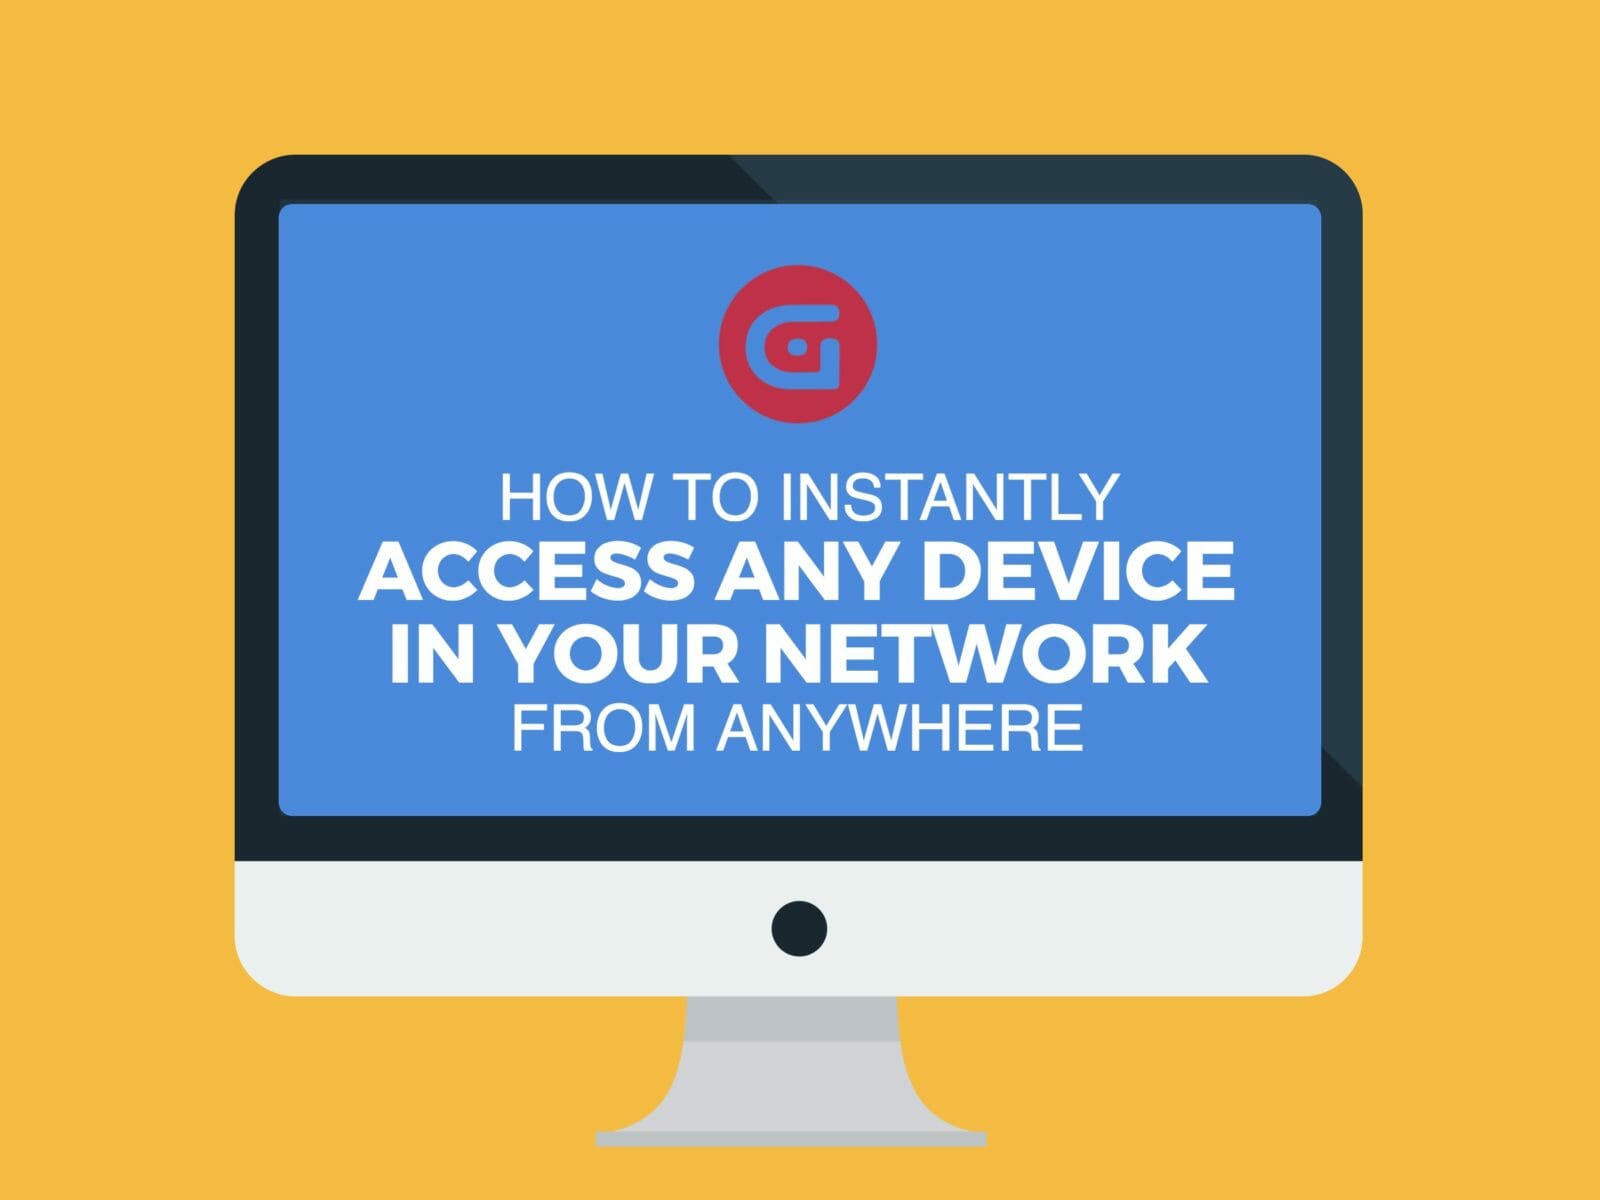 How to Instantly Access Any Device in your Network, from Anywhere